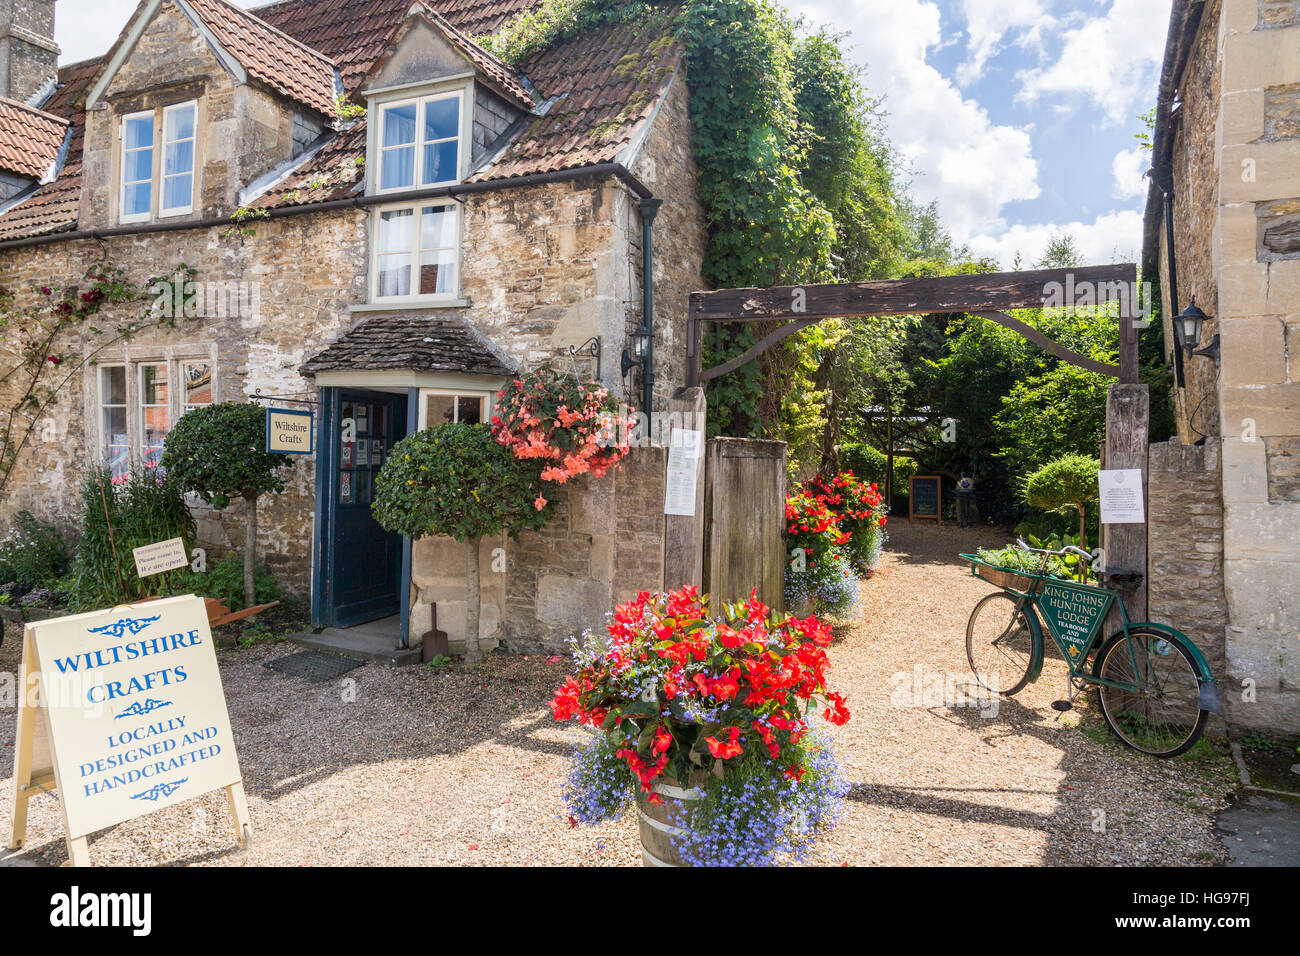 An attractive stone built craft shop in the village of Lacock, Wiltshire, England, UK Stock Photo